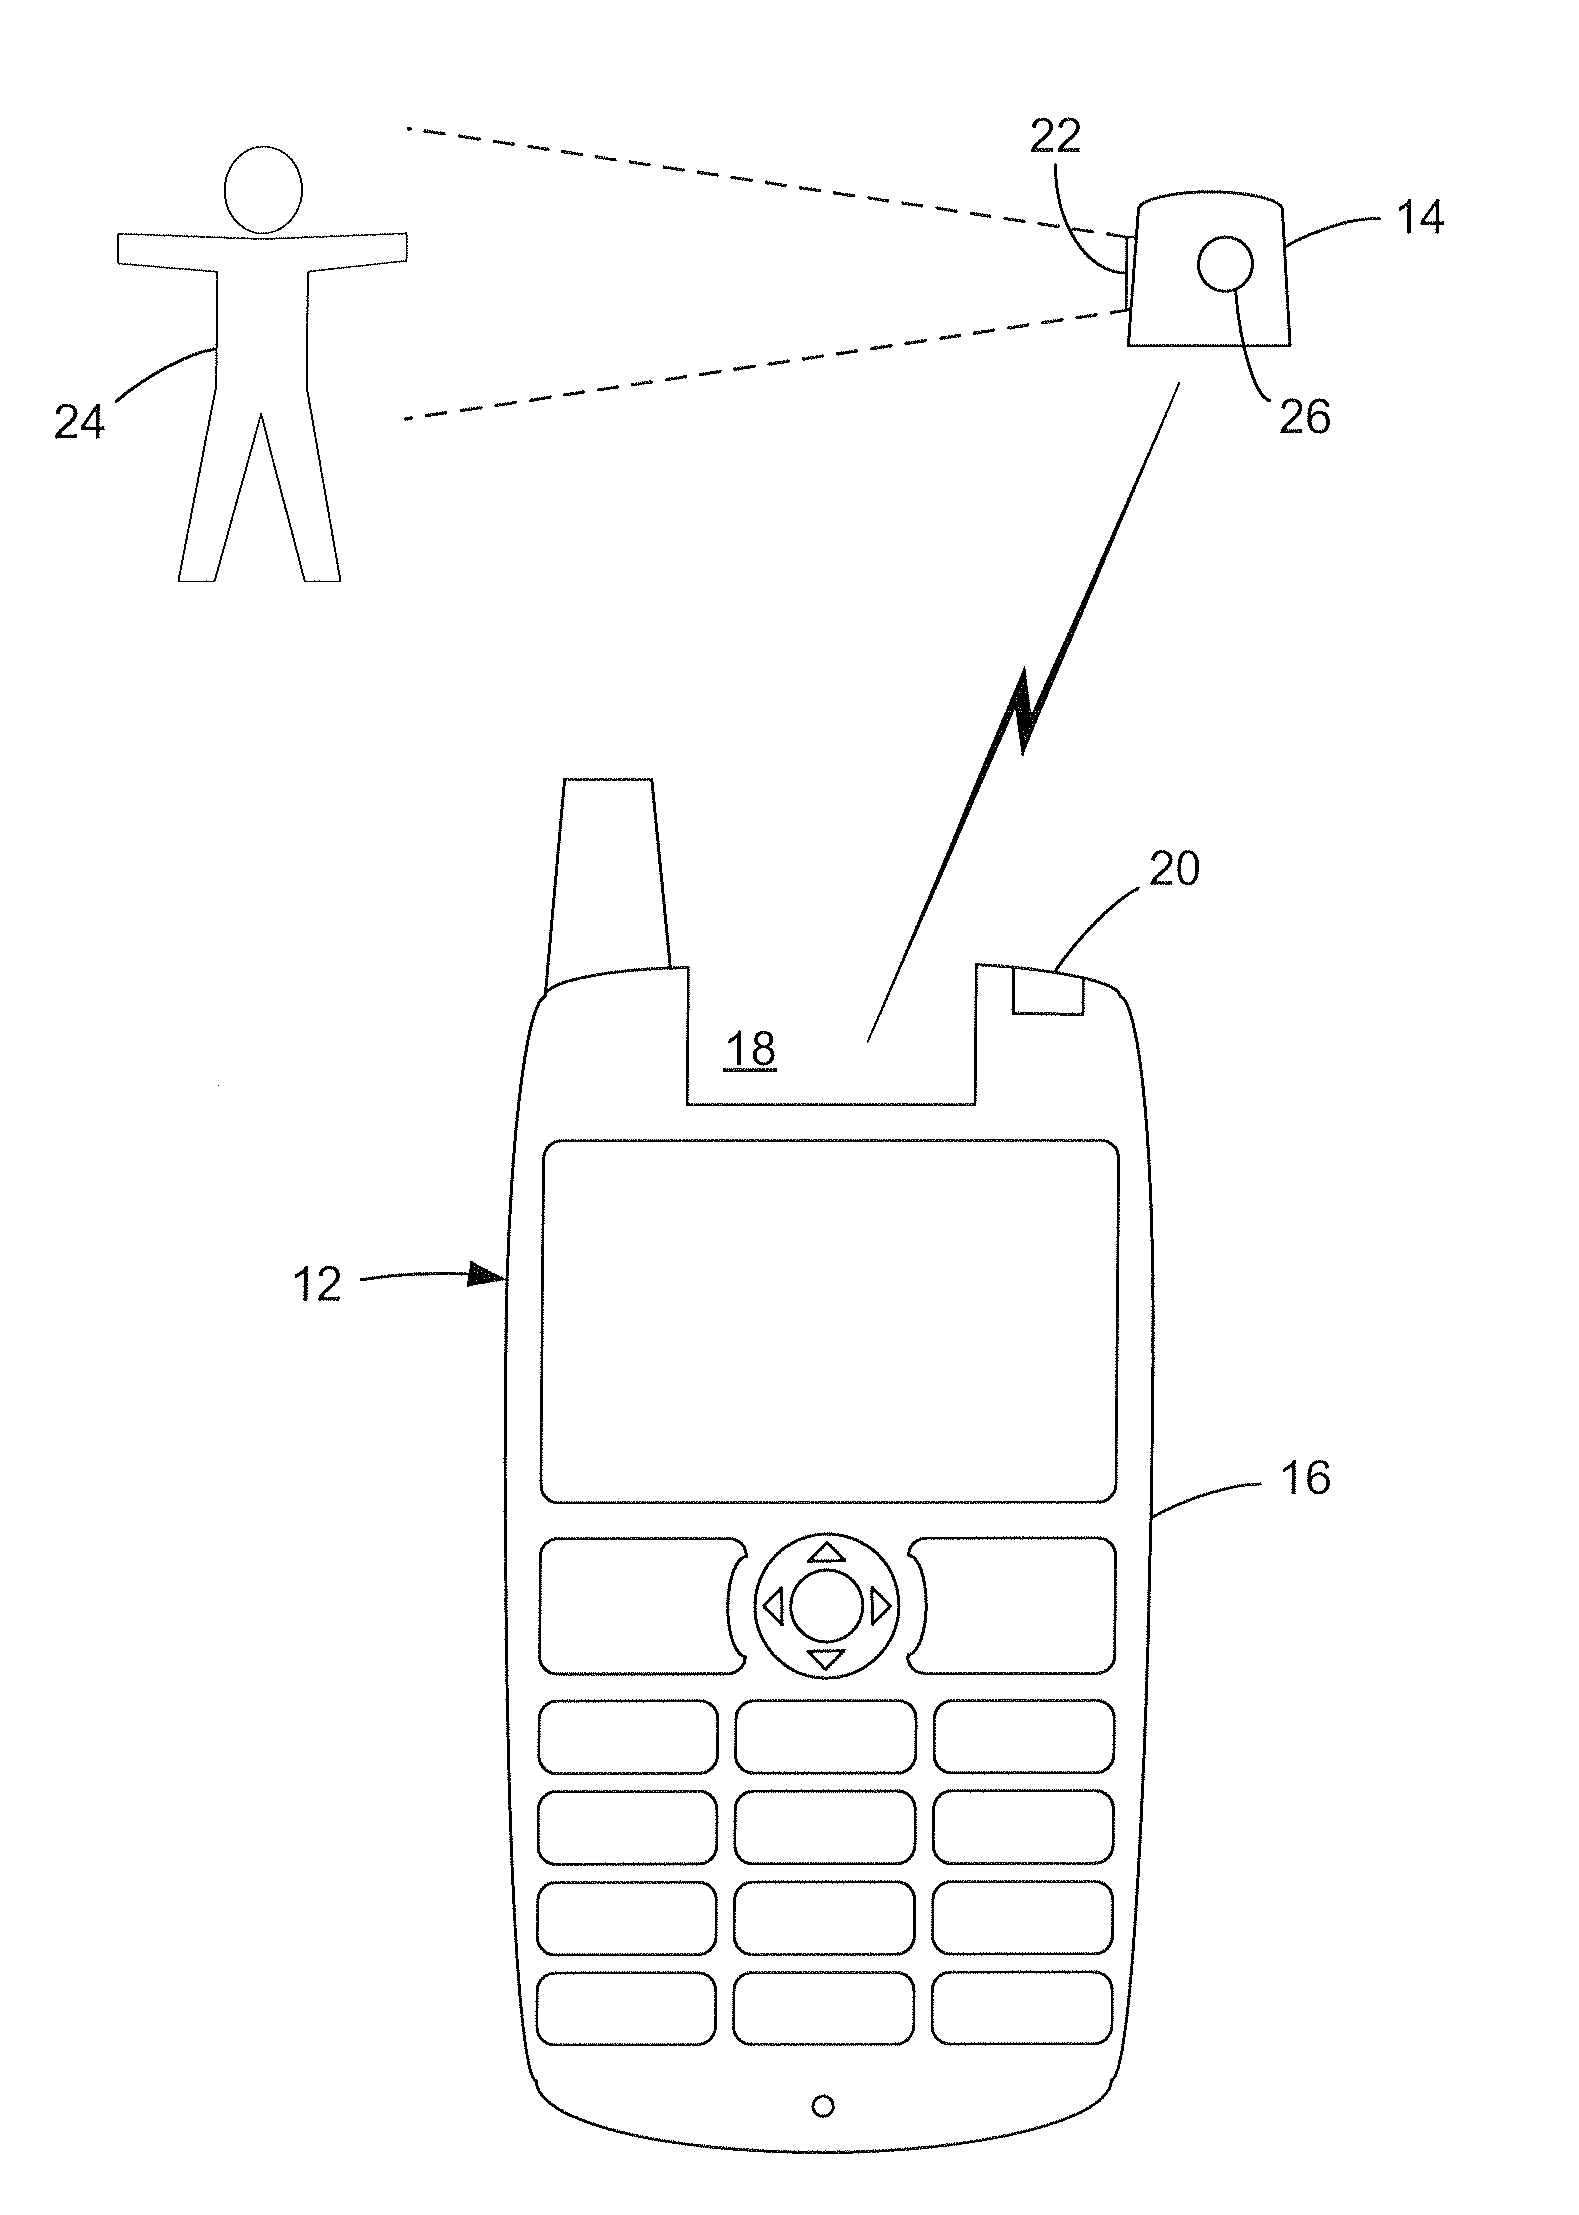 Mobile phone with integrated wireless camera